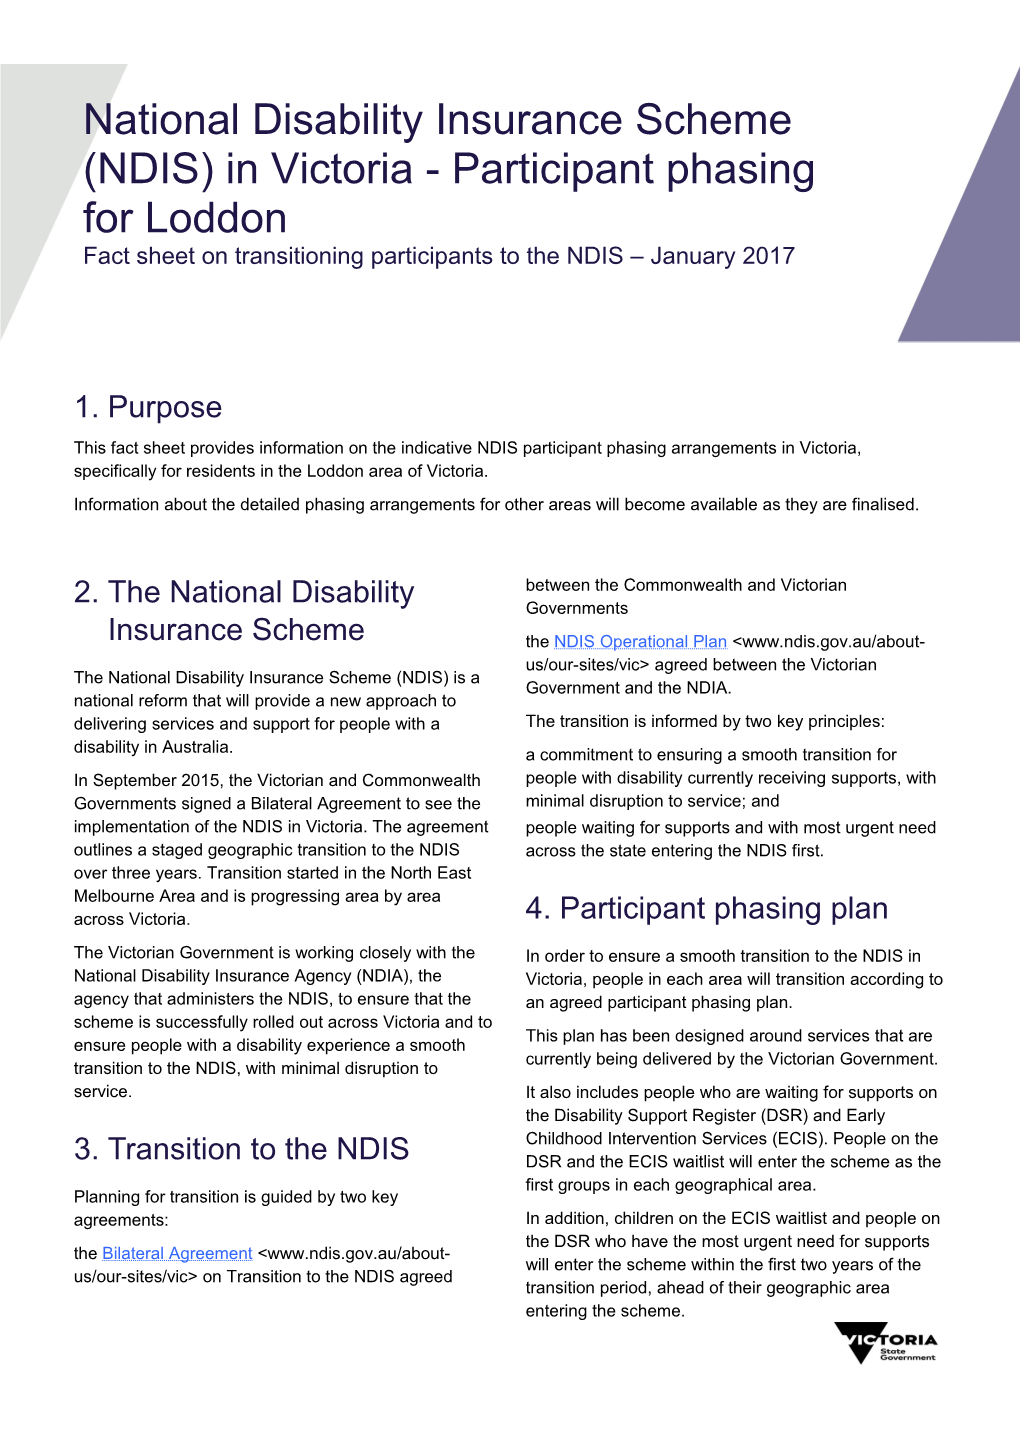 National Disability Insurance Scheme (NDIS) in Victoria - Participant Phasing for Loddon